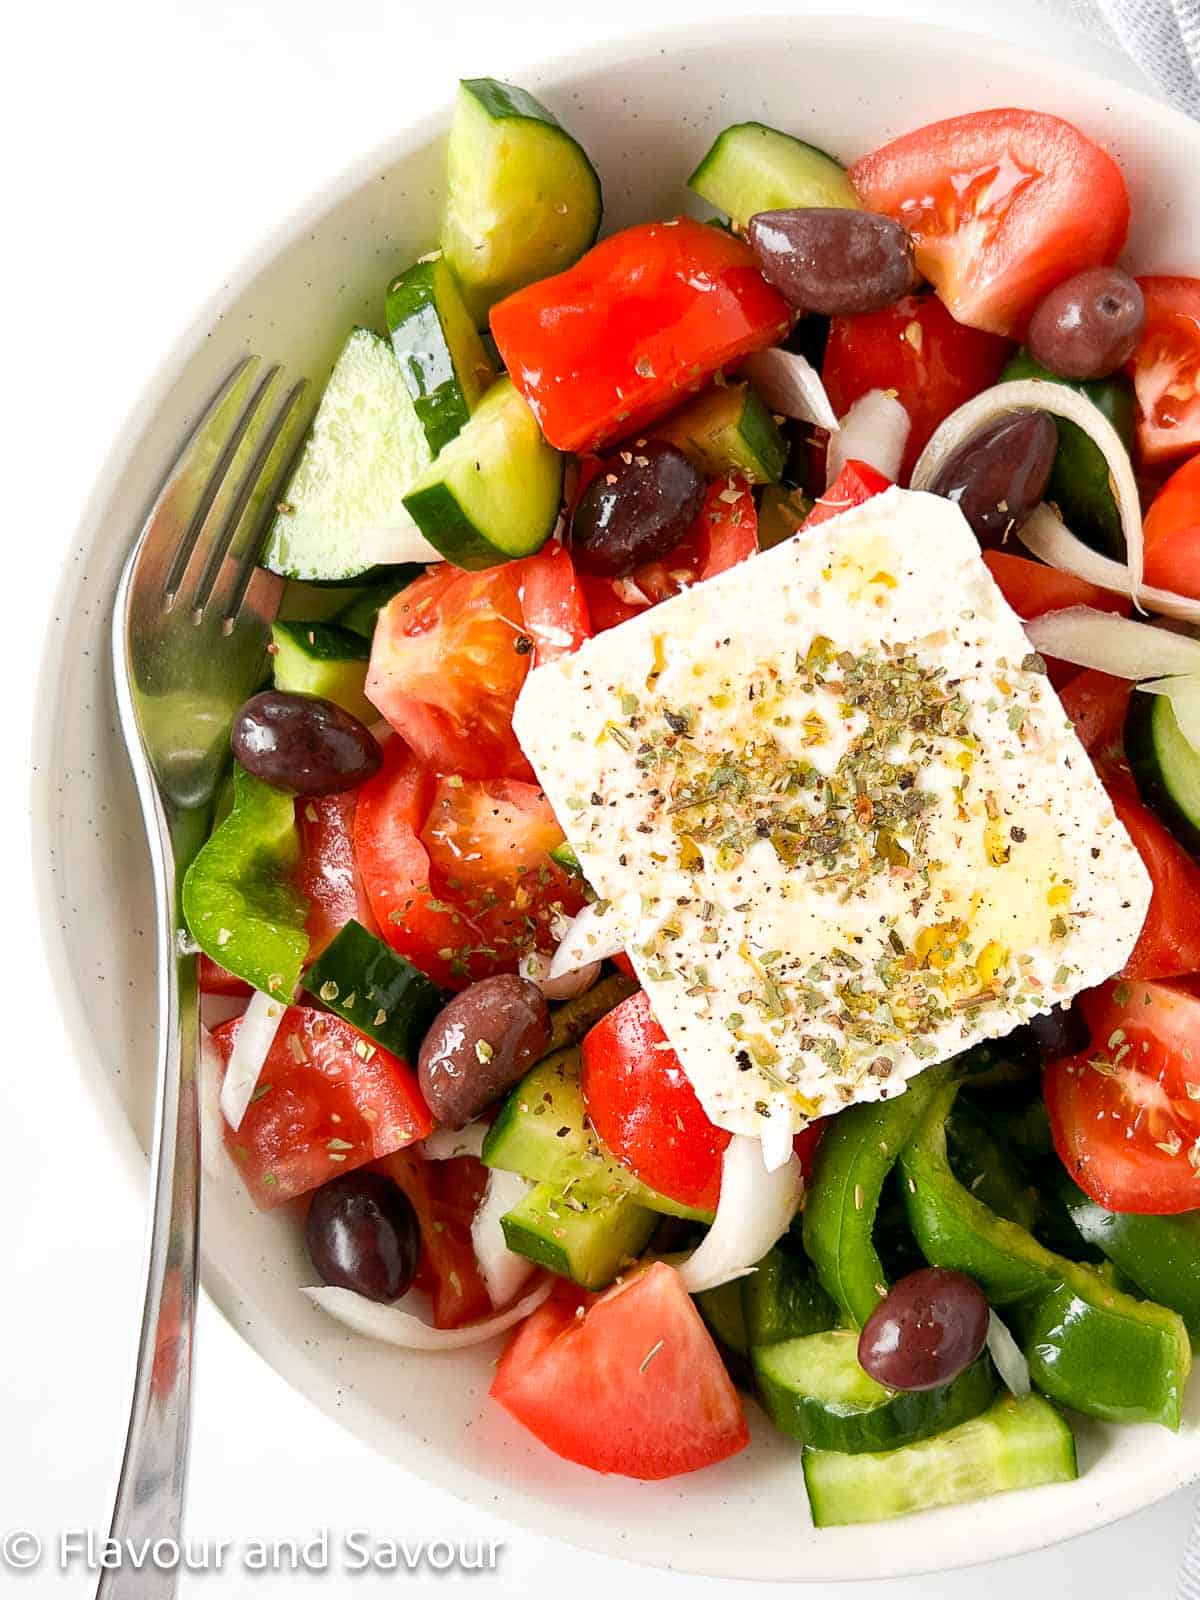 A traditional Greek salad with a slab of feta cheese on top.